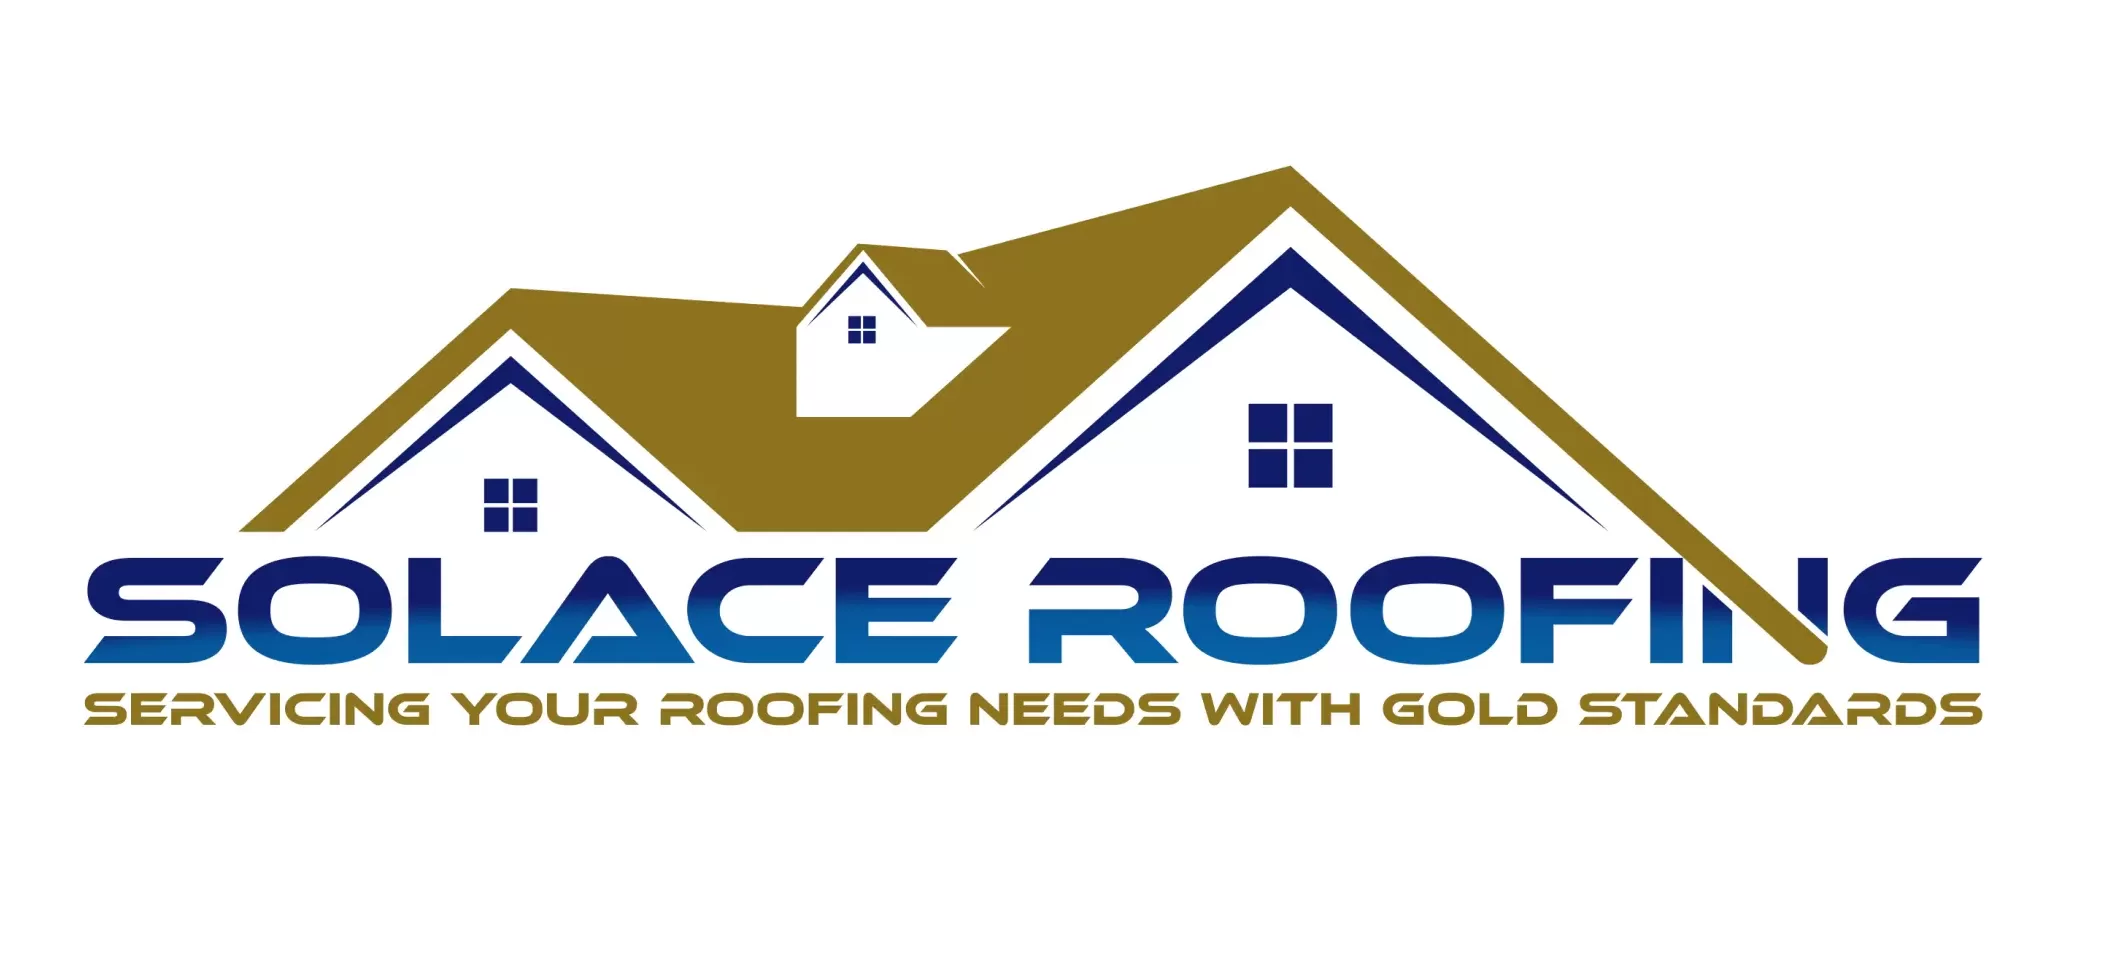 Solace Family Roofing